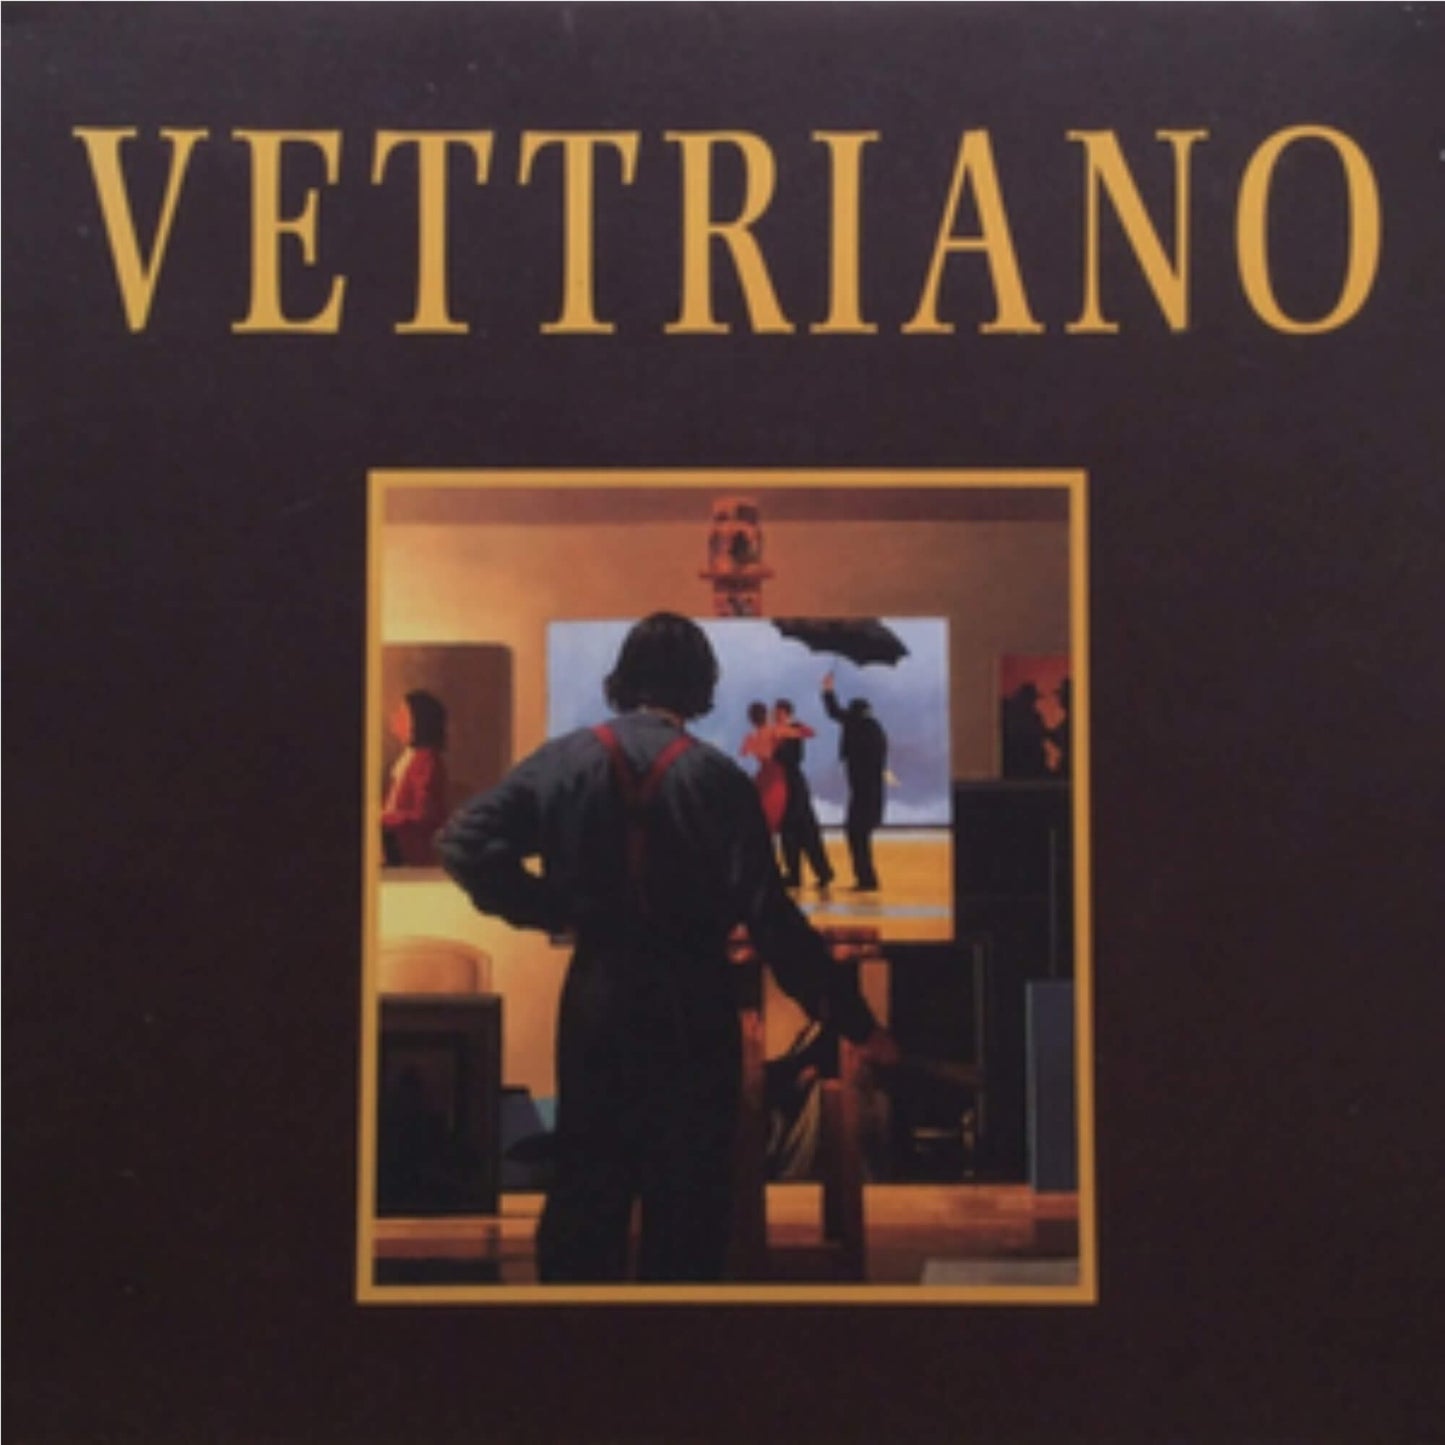 A Date With Fate Exhibition Catalogue Jack Vettriano